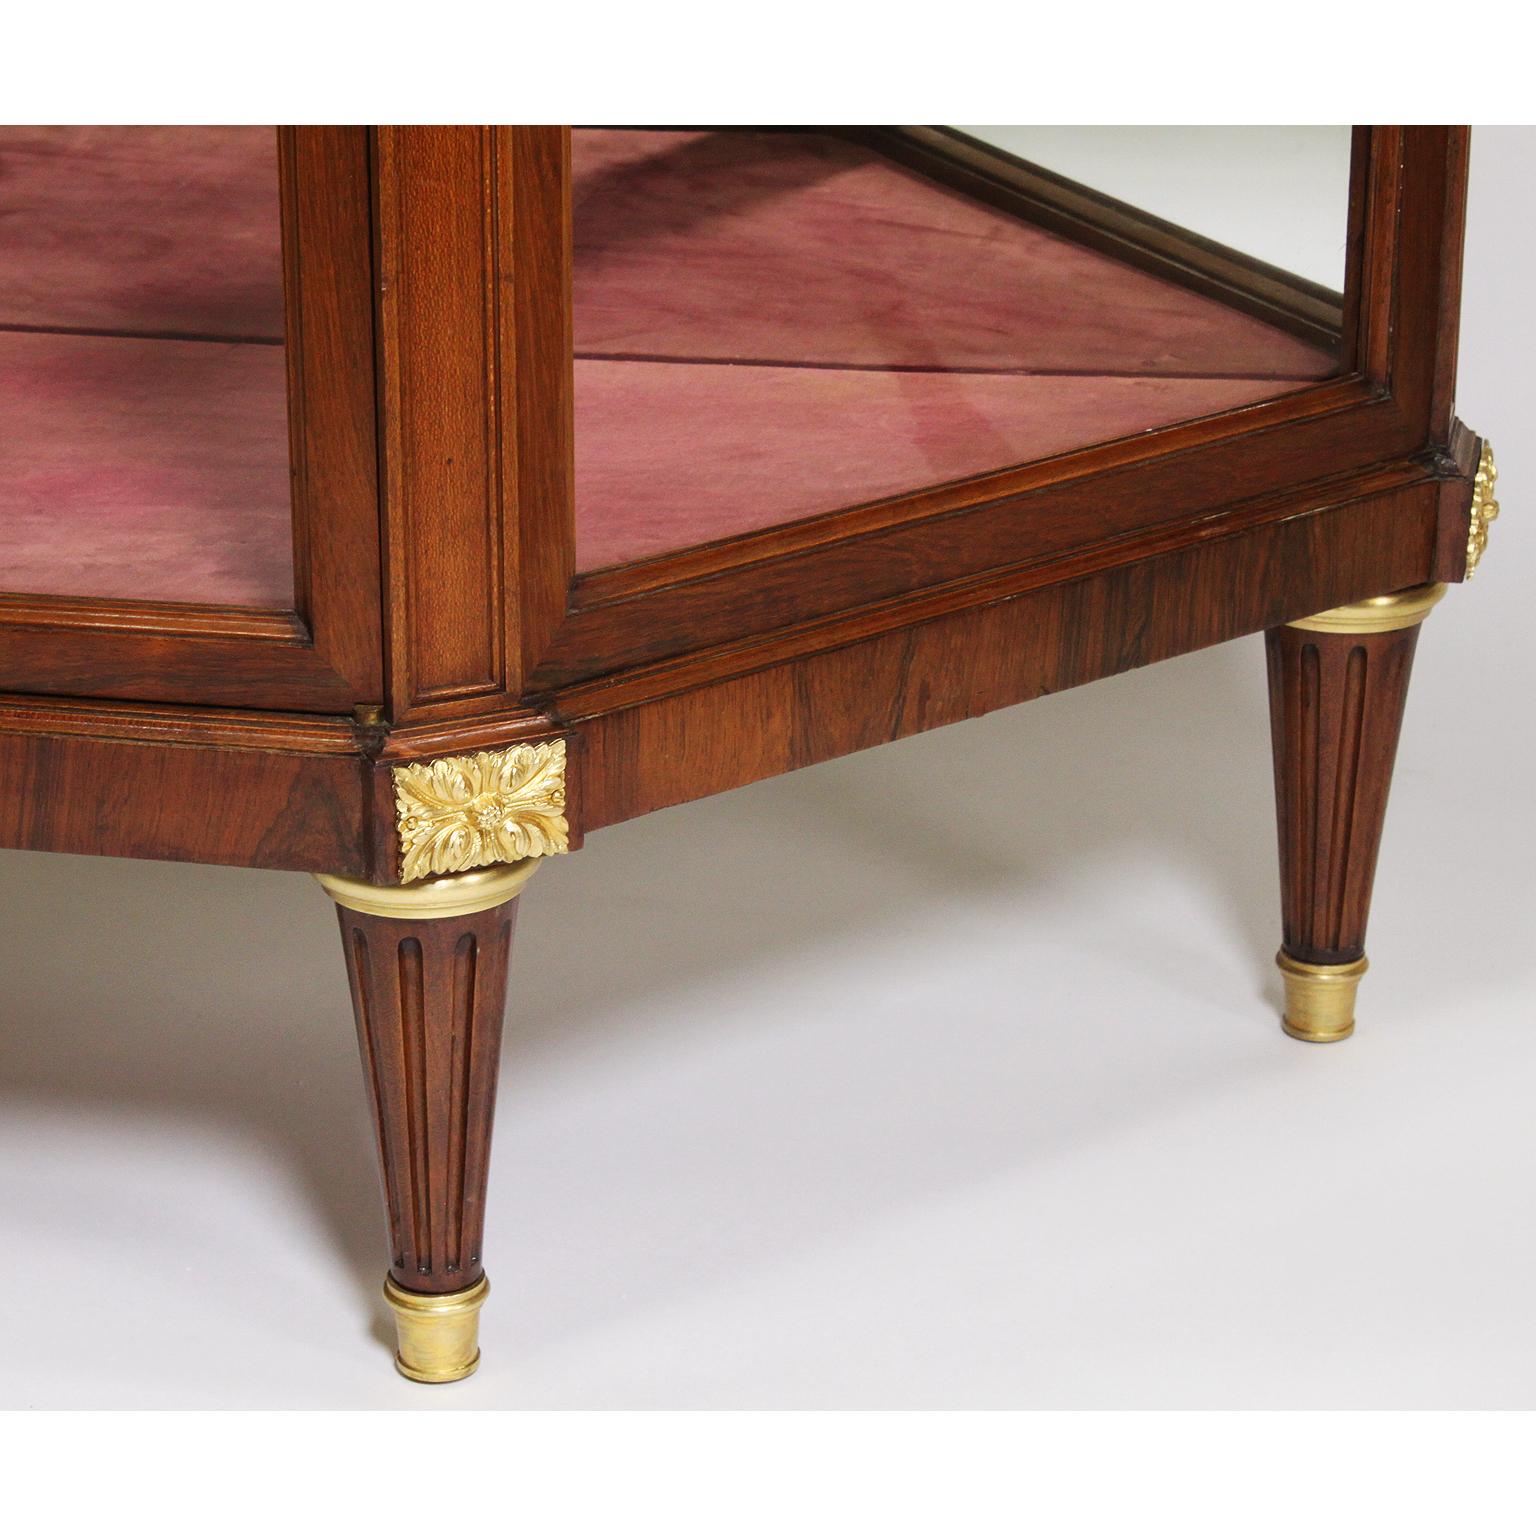 French Louis XVI Style Mahogany and Gilt-Bronze Mounted Sever Exhibition Vitrine For Sale 2